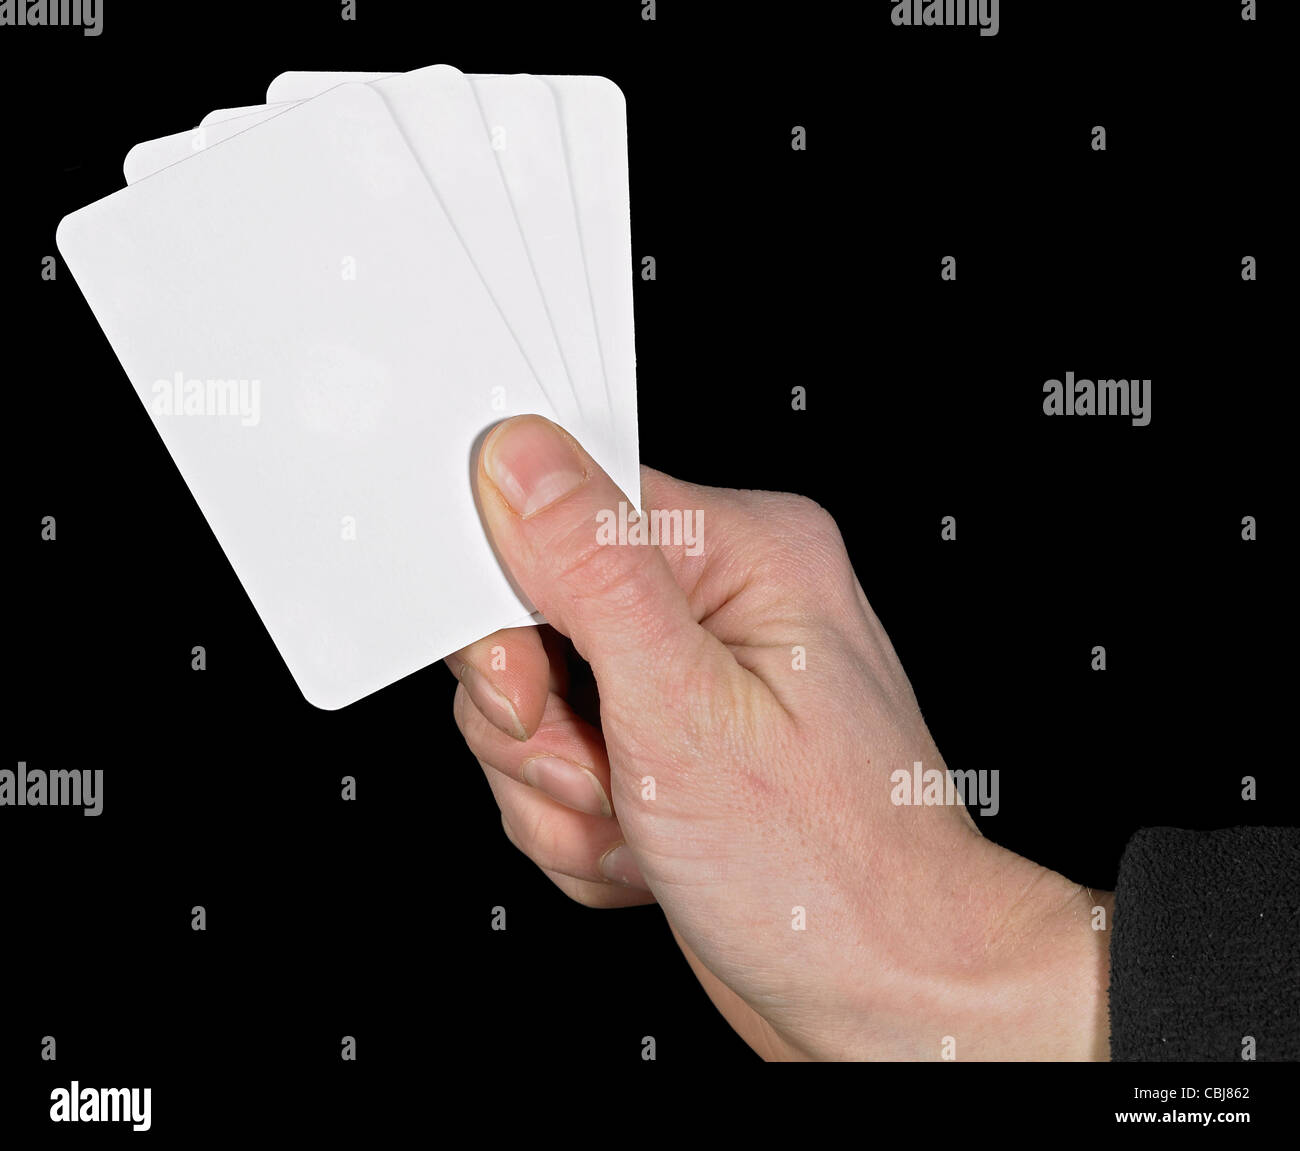 studio photography of a hand and white playing cards in dark back Stock Photo